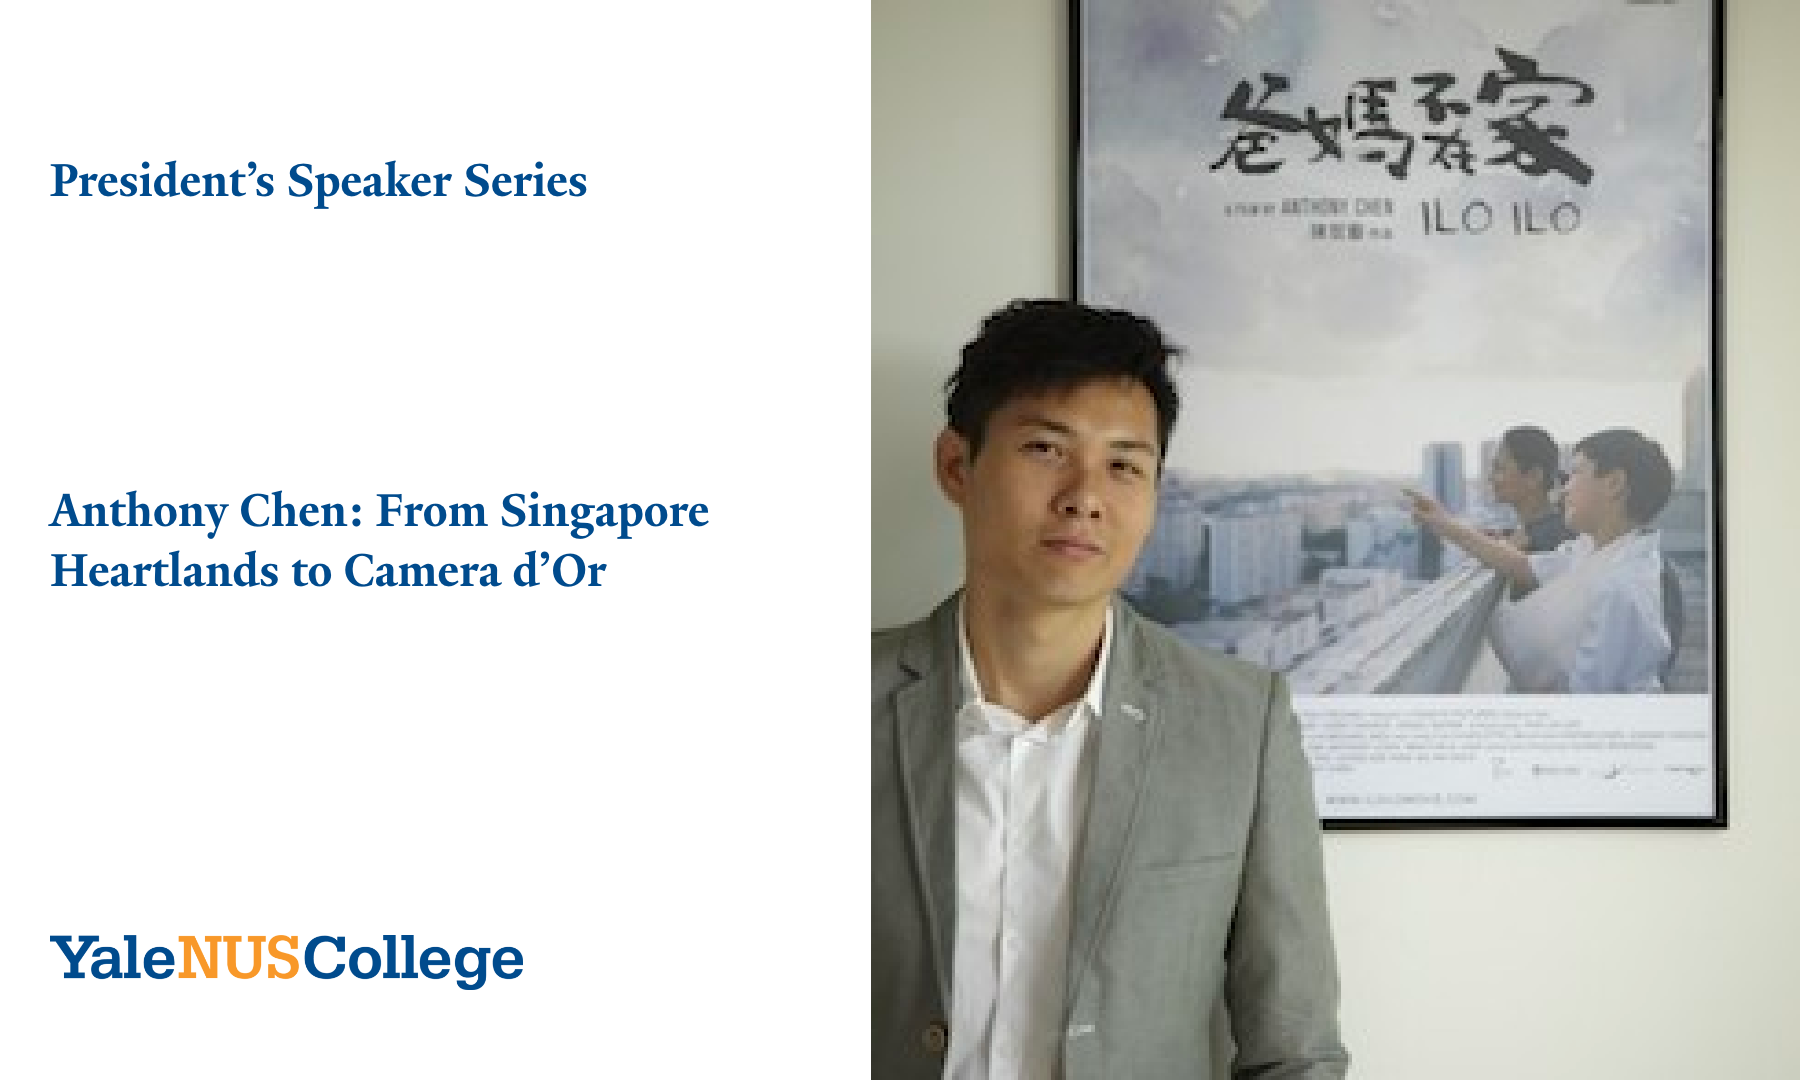 Anthony Chen: From Singapore Heartlands to Camera d'Or